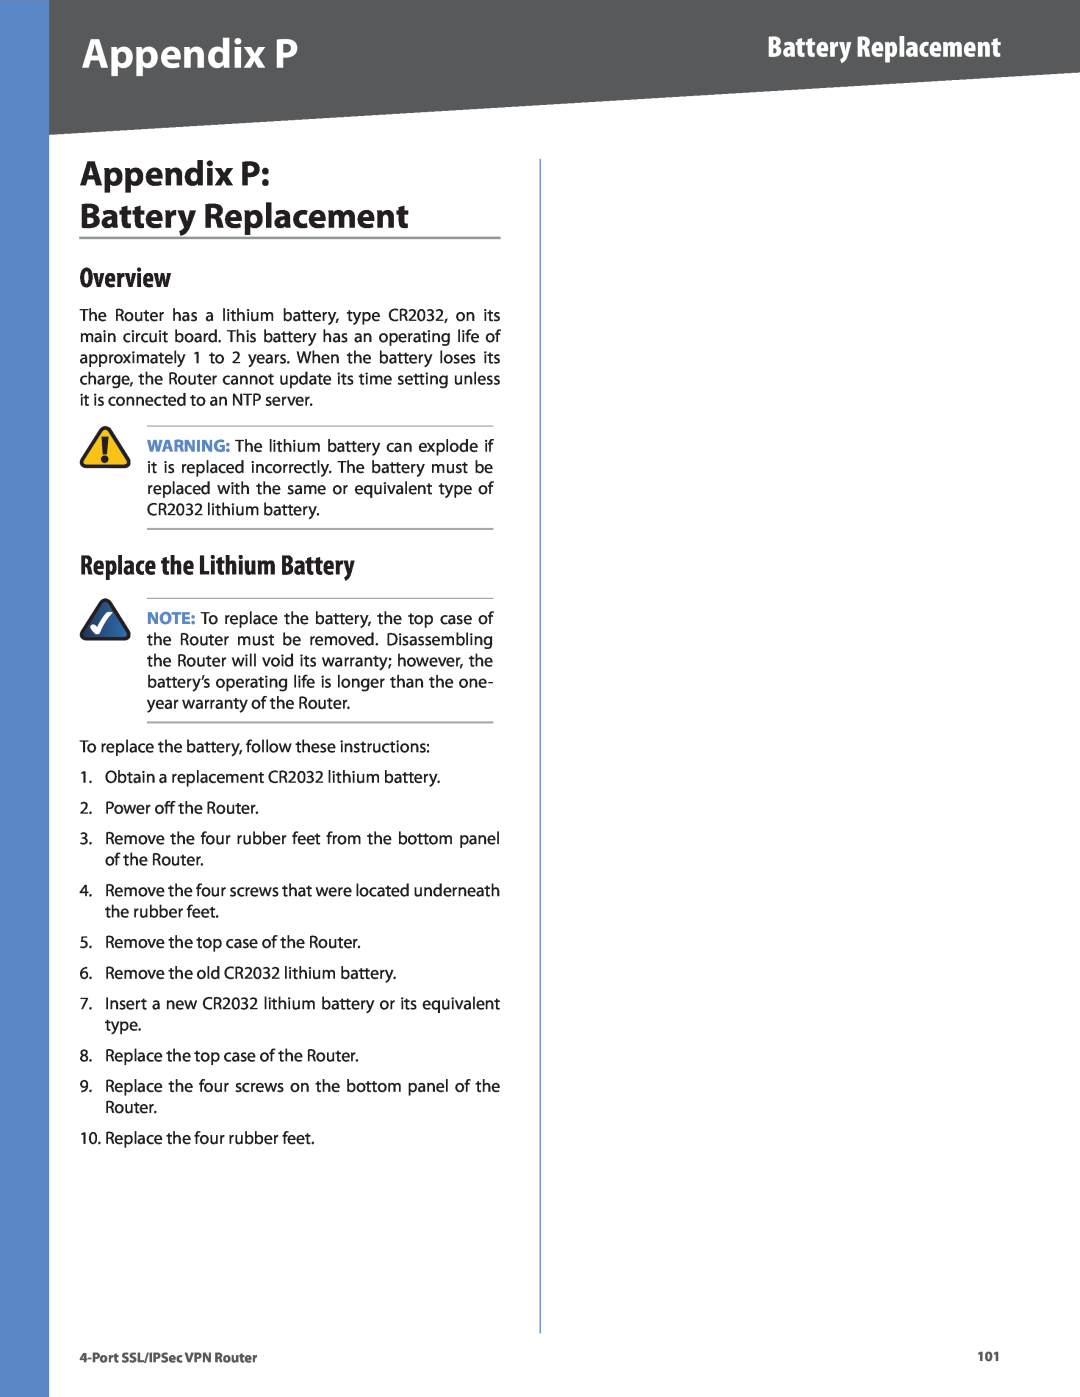 Cisco Systems RVL200 manual Appendix P Battery Replacement, Replace the Lithium Battery, Overview 